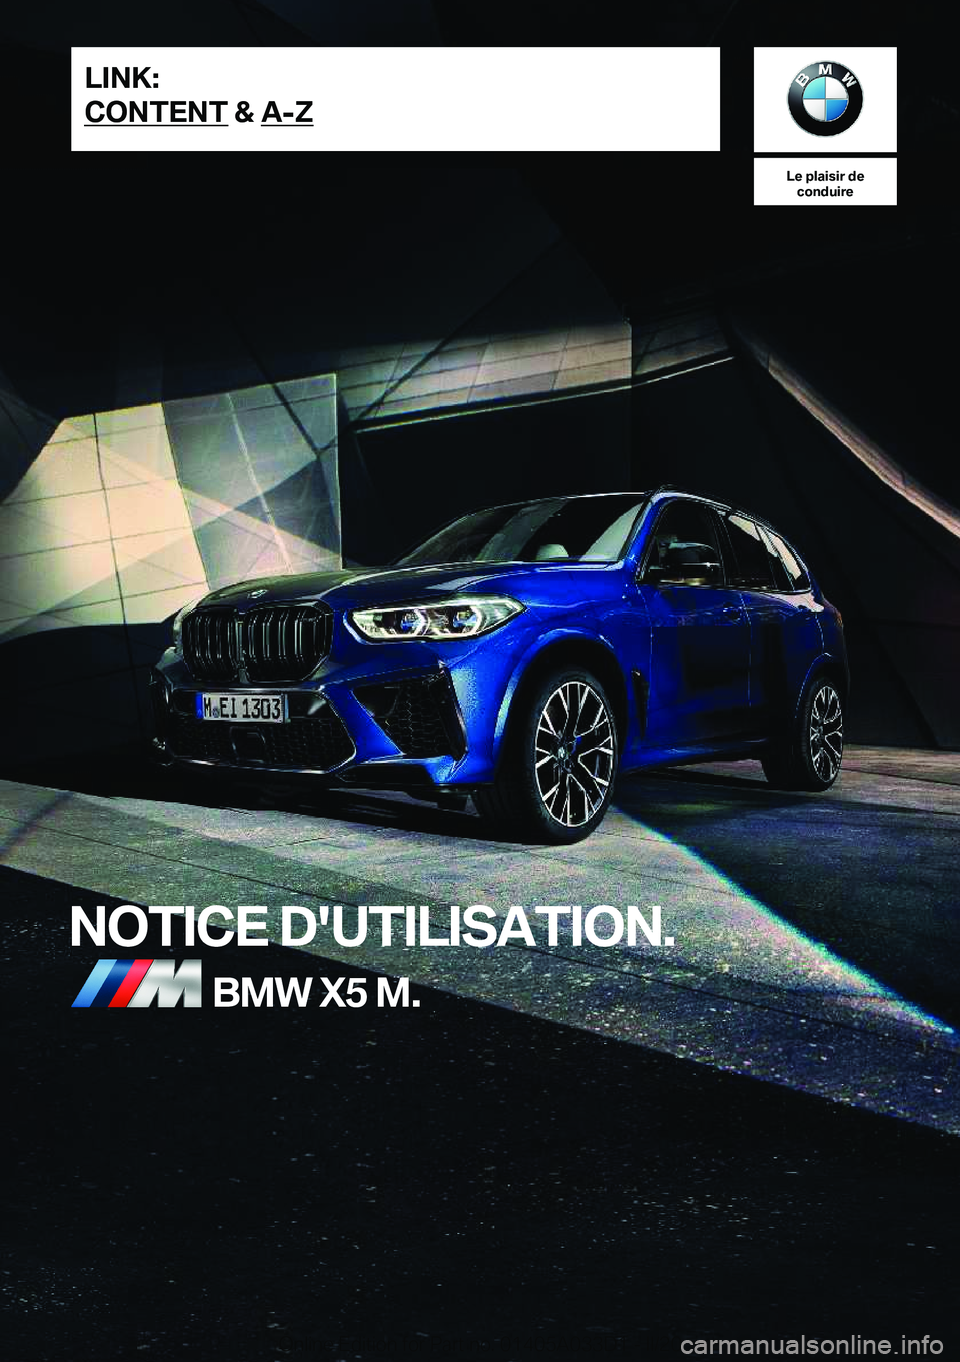 BMW X5 M 2020  Notices Demploi (in French) �L�e��p�l�a�i�s�i�r��d�e�c�o�n�d�u�i�r�e
�N�O�T�I�C�E��D�'�U�T�I�L�I�S�A�T�I�O�N�.�B�M�W��X�5��M�.�L�I�N�K�:
�C�O�N�T�E�N�T��&��A�-�Z�O�n�l�i�n�e��E�d�i�t�i�o�n��f�o�r��P�a�r�t��n�o�.�